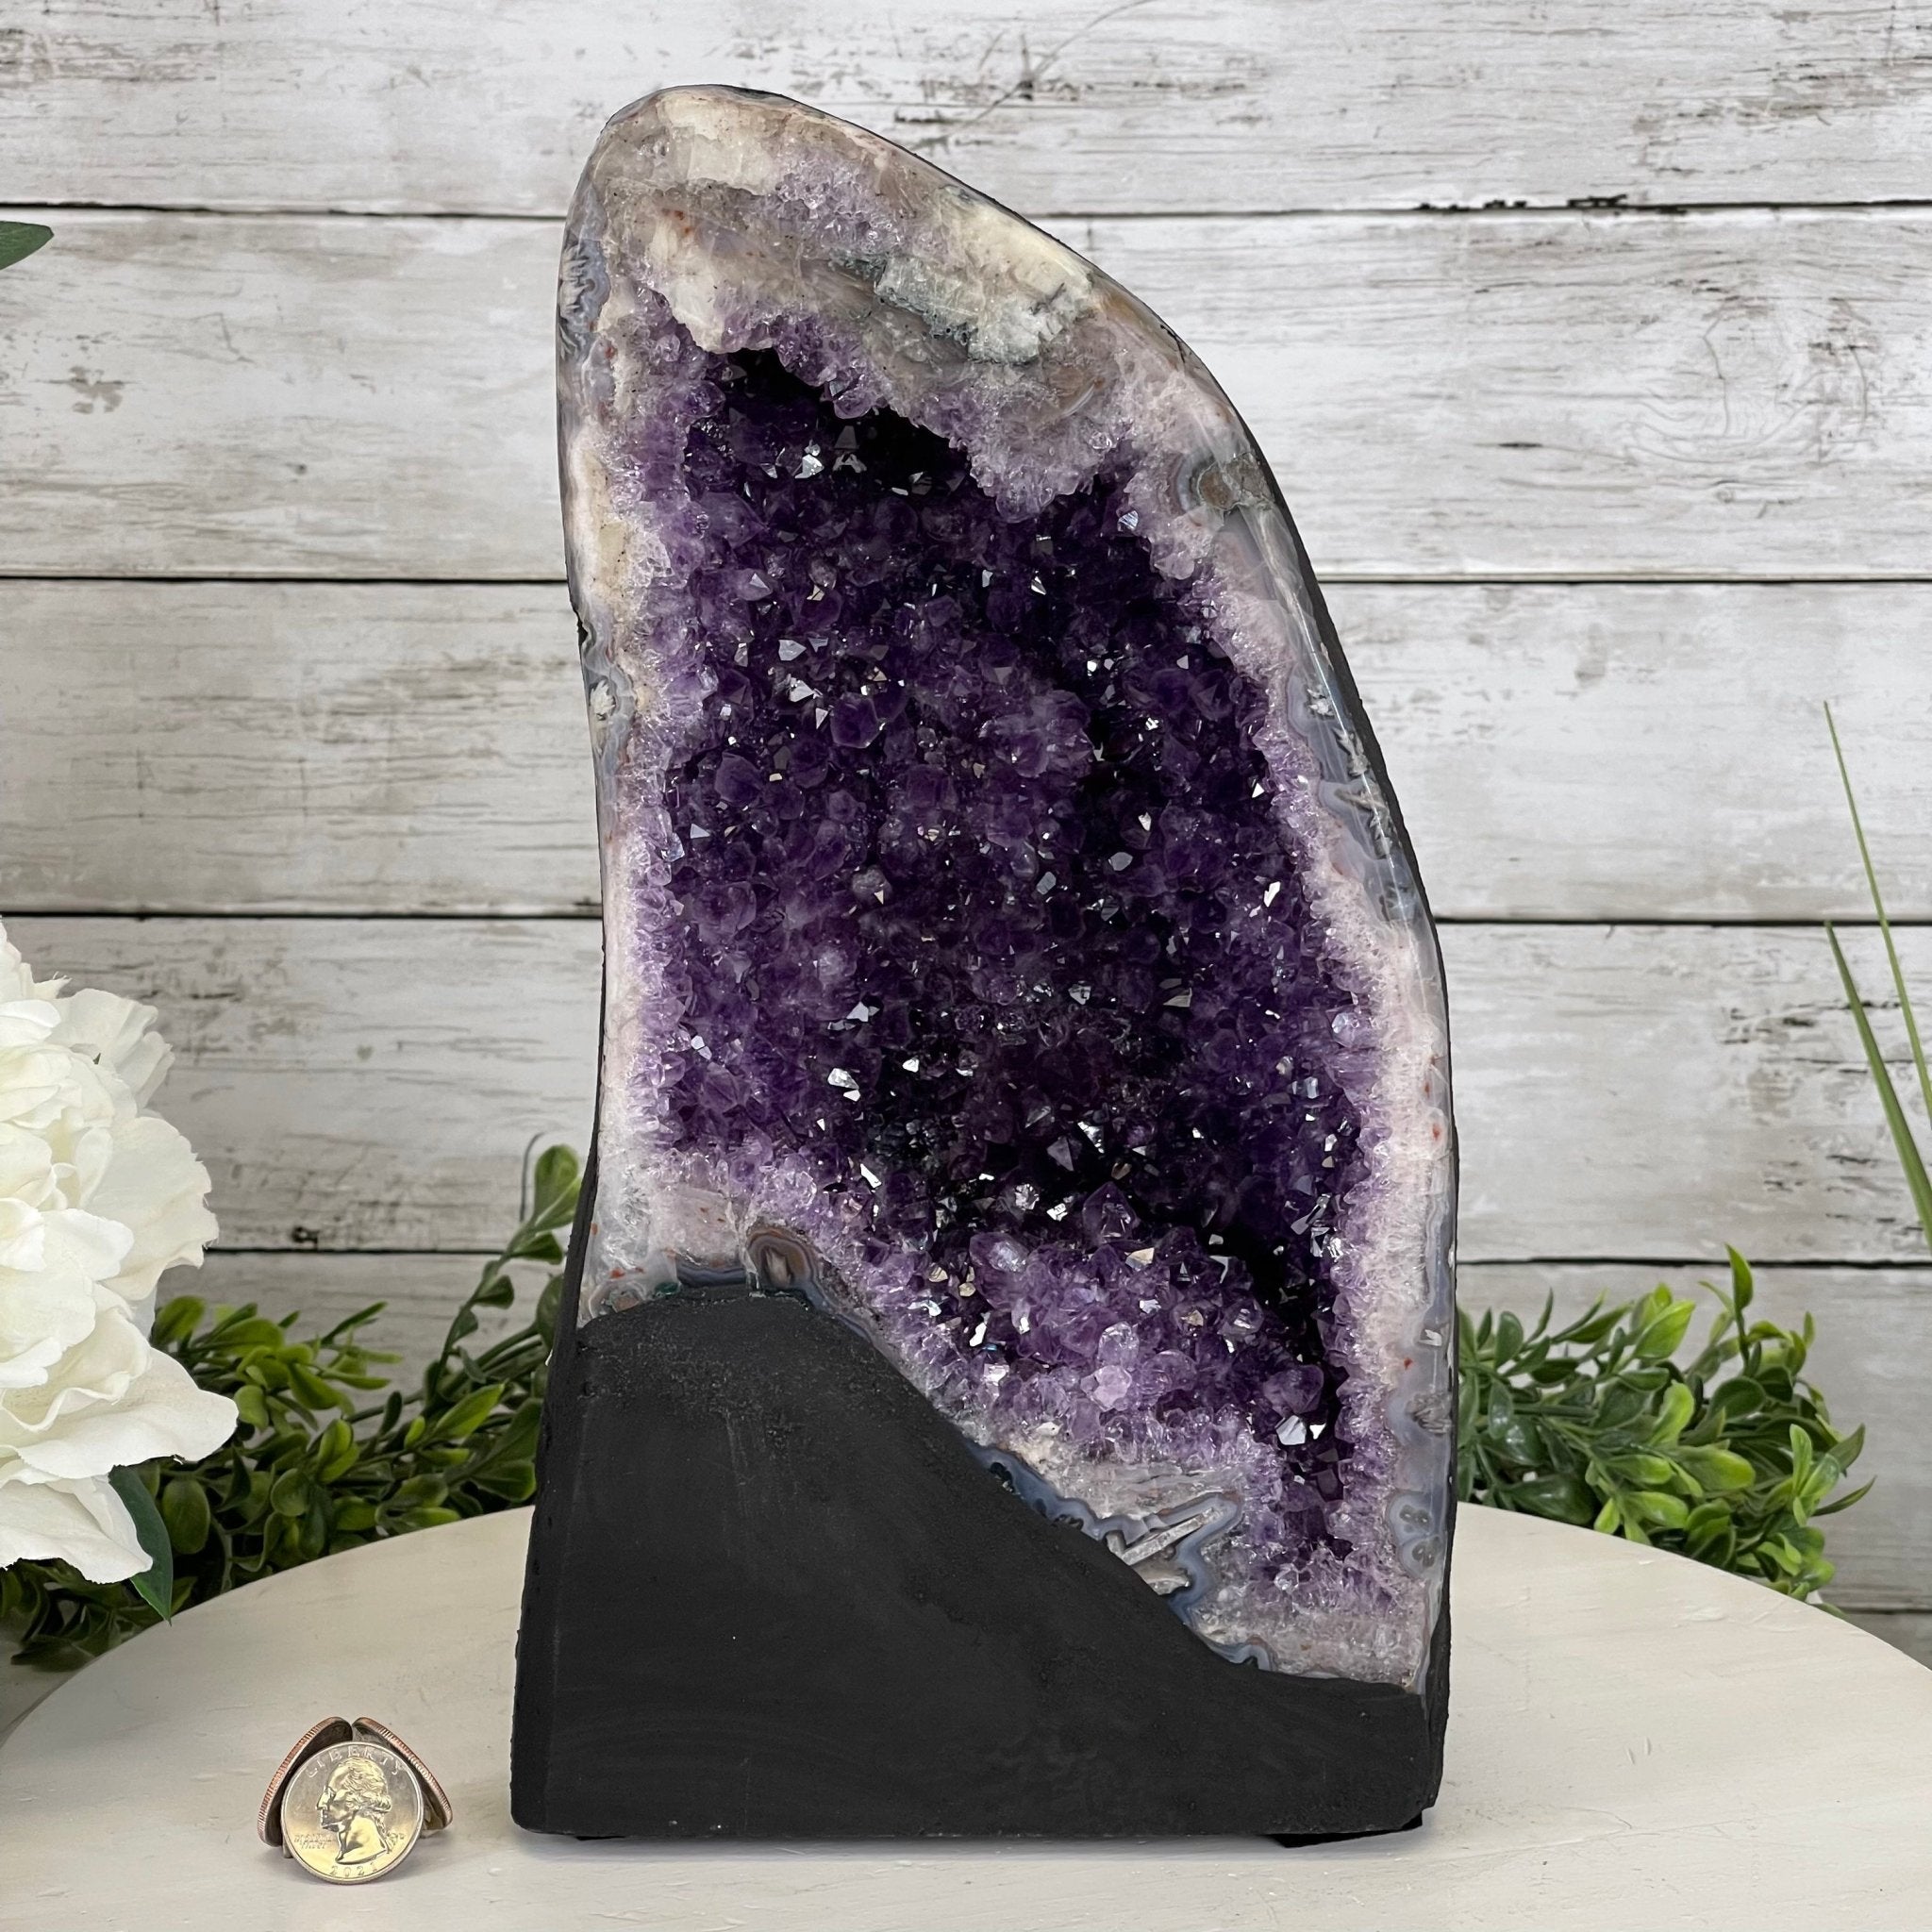 Super Quality Brazilian Amethyst Cathedral, 13.8 lbs & 12" Tall #5601-1024 by Brazil Gems - Brazil GemsBrazil GemsSuper Quality Brazilian Amethyst Cathedral, 13.8 lbs & 12" Tall #5601-1024 by Brazil GemsCathedrals5601-1024